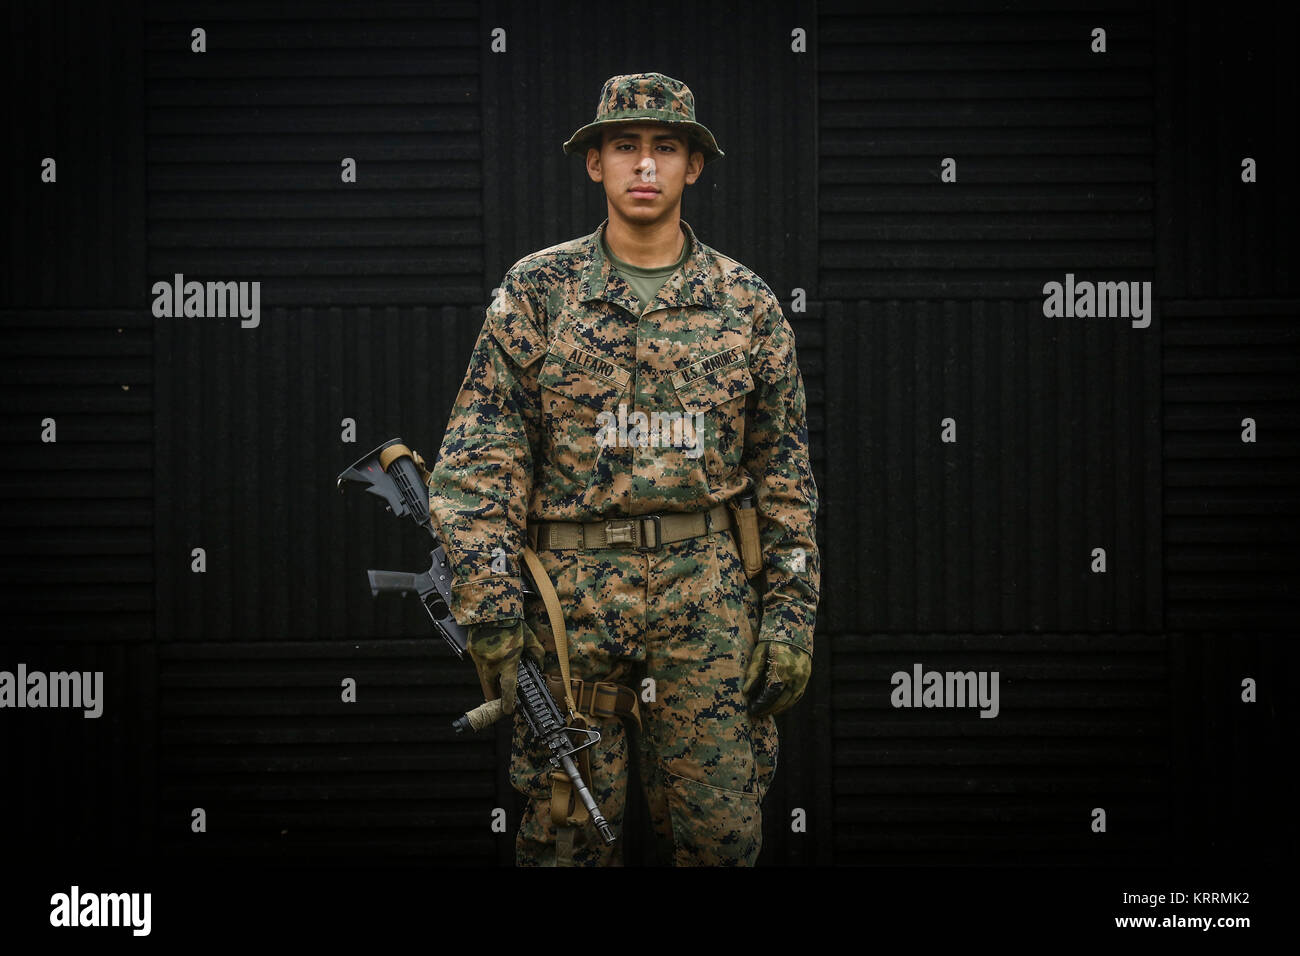 A U.S. Marine Corps soldier stand for a portrait with his rifle during the Marine Division Annual Squad Competition at Camp Hansen December 7, 2017 in Okinawa, Japan. Stock Photo